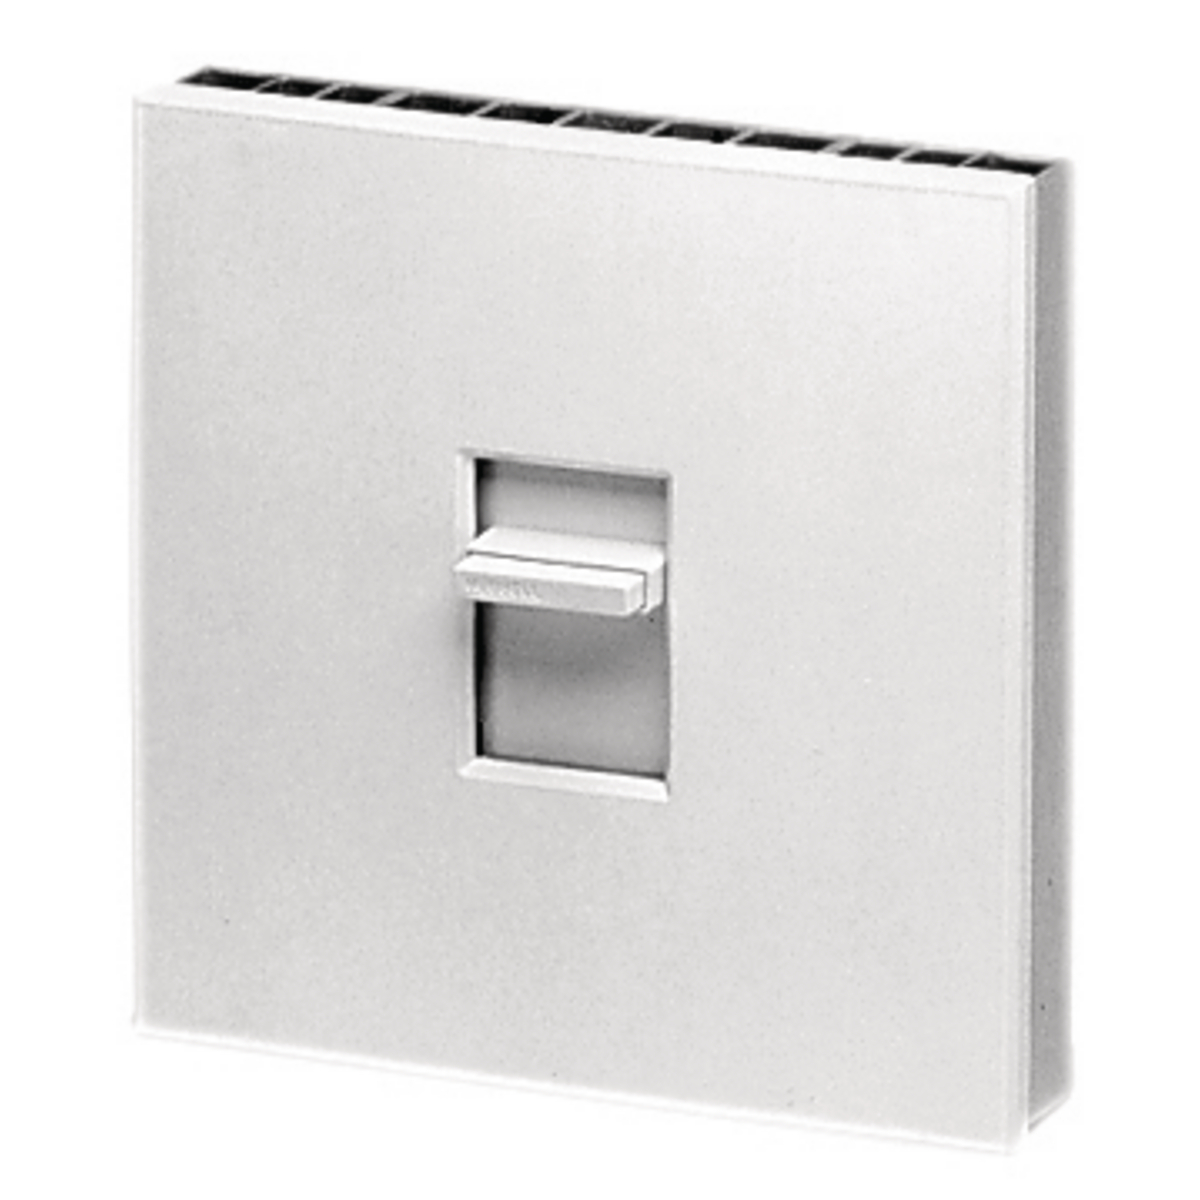 DIMMER, ARCH SLIDE, 1500W 120VAC,WH